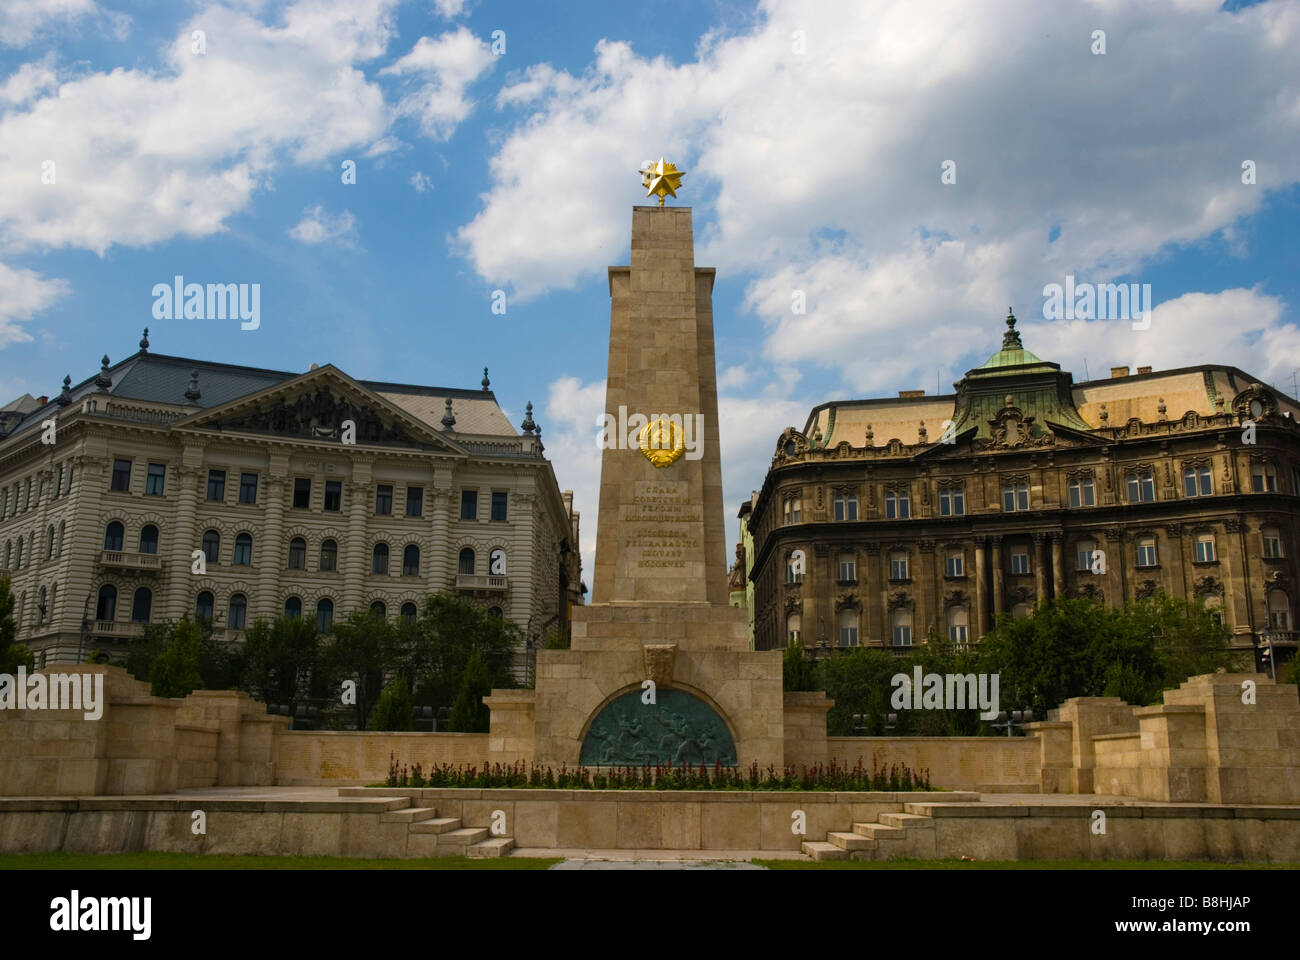 Soviet Army Memorial at Szabadsag ter sqaure in Budapest Hungary Europe Stock Photo